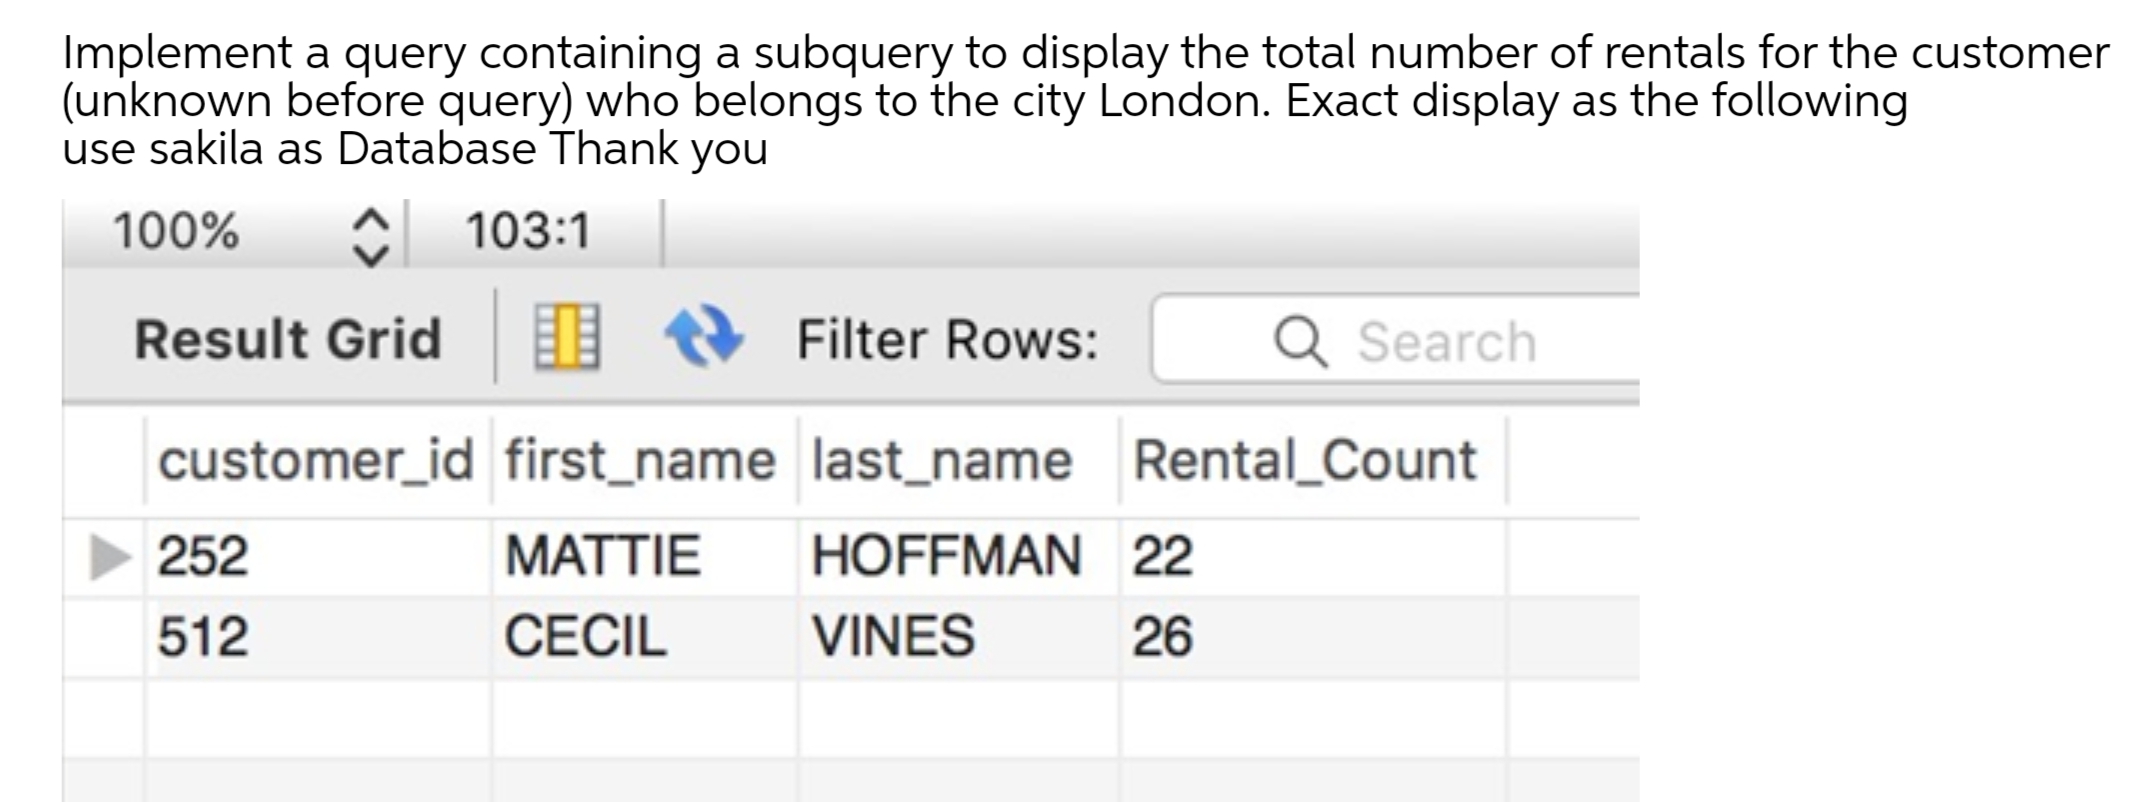 Implement a query containing a subquery to display the total number of rentals for the customer
(unknown before query) who belongs to the city London. Exact display as the following
use sakila as Database Thank
you
100%
C 103:1
Result Grid
I & Filter Rows:
Q Search
customer_id first_name last_name Rental_Count
252
МАTTIE
HOFFMAN 22
512
СЕCIL
VINES
26
